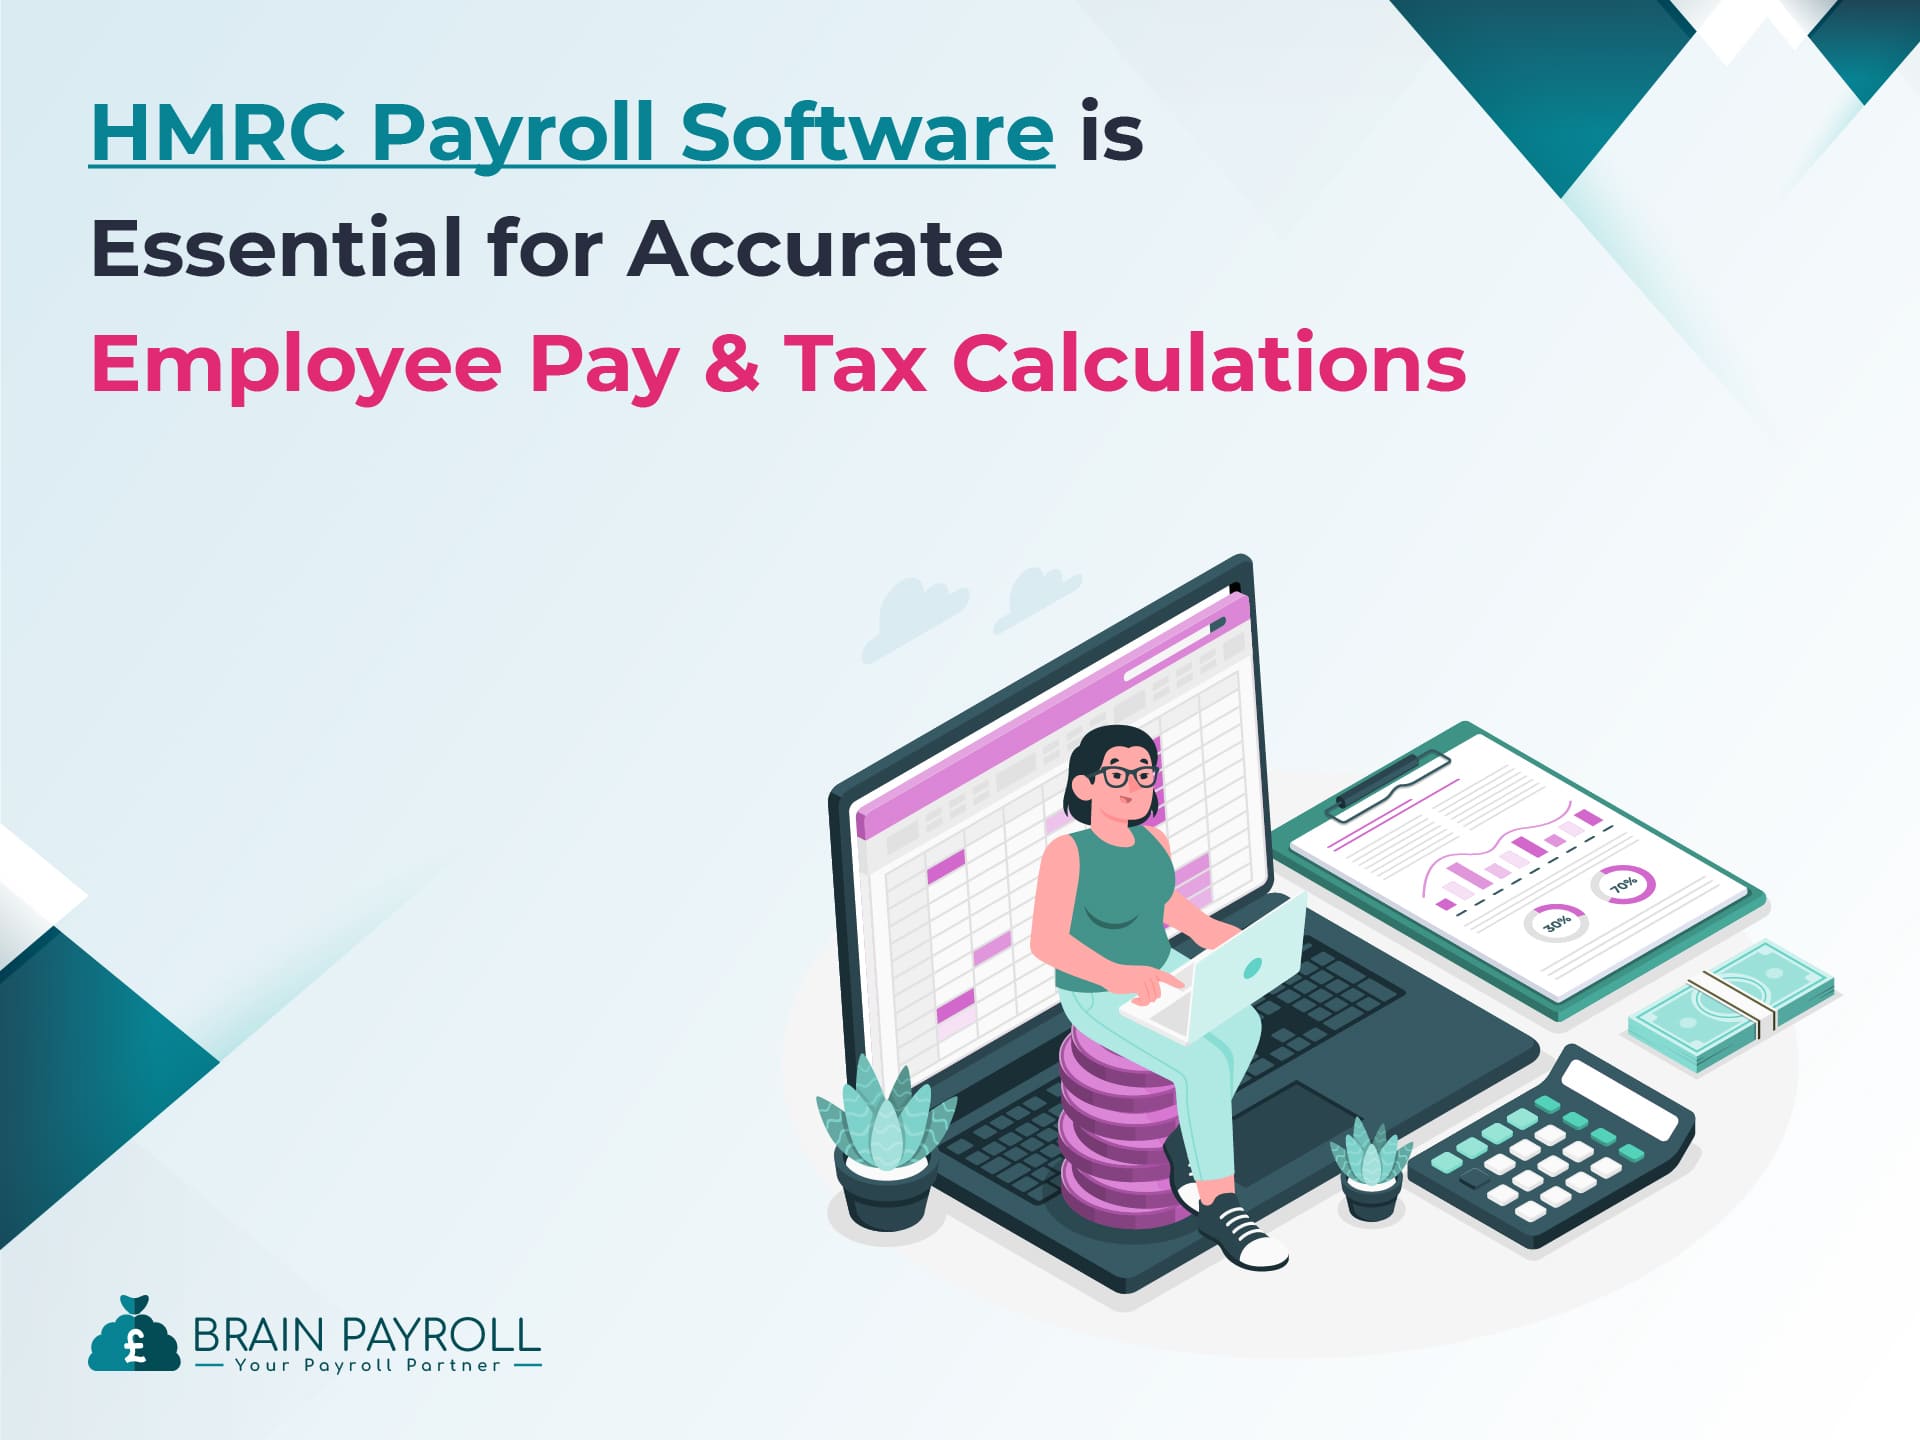 Why HMRC Payroll Software is Essential for Accurate Employee Pay and Tax Calculations